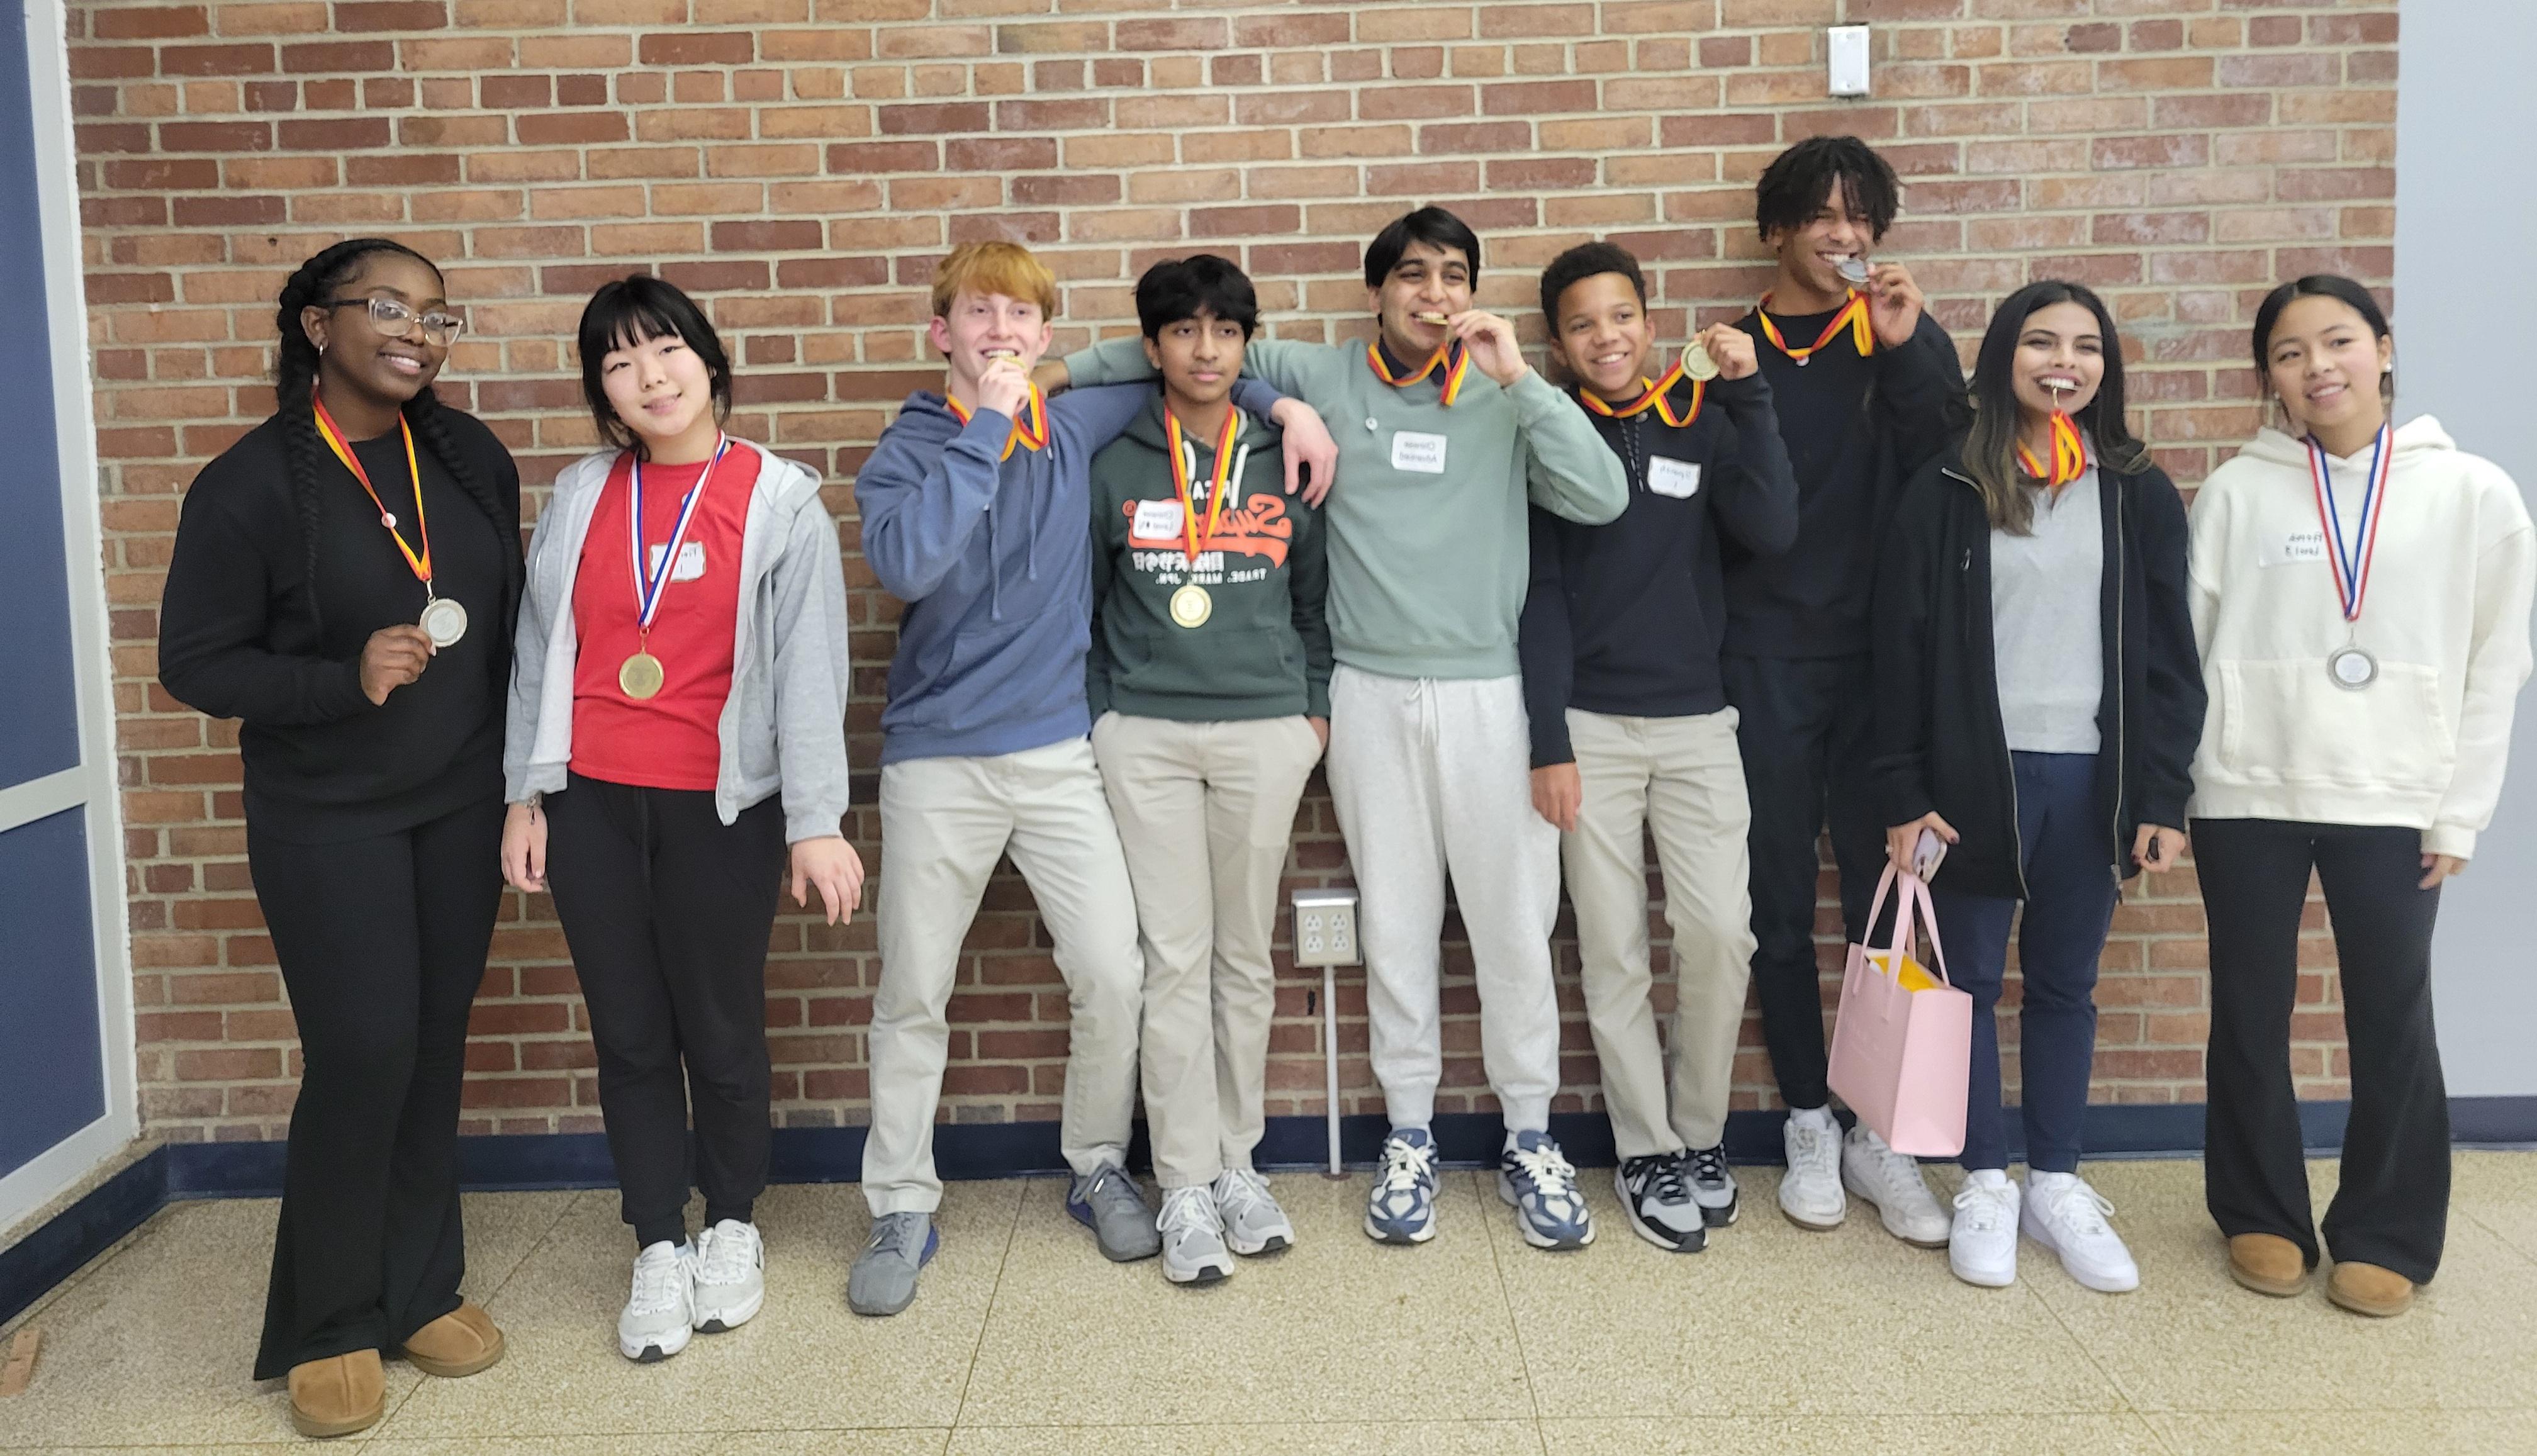 Nine Students Place at County-Wide Oral Proficiency Contest